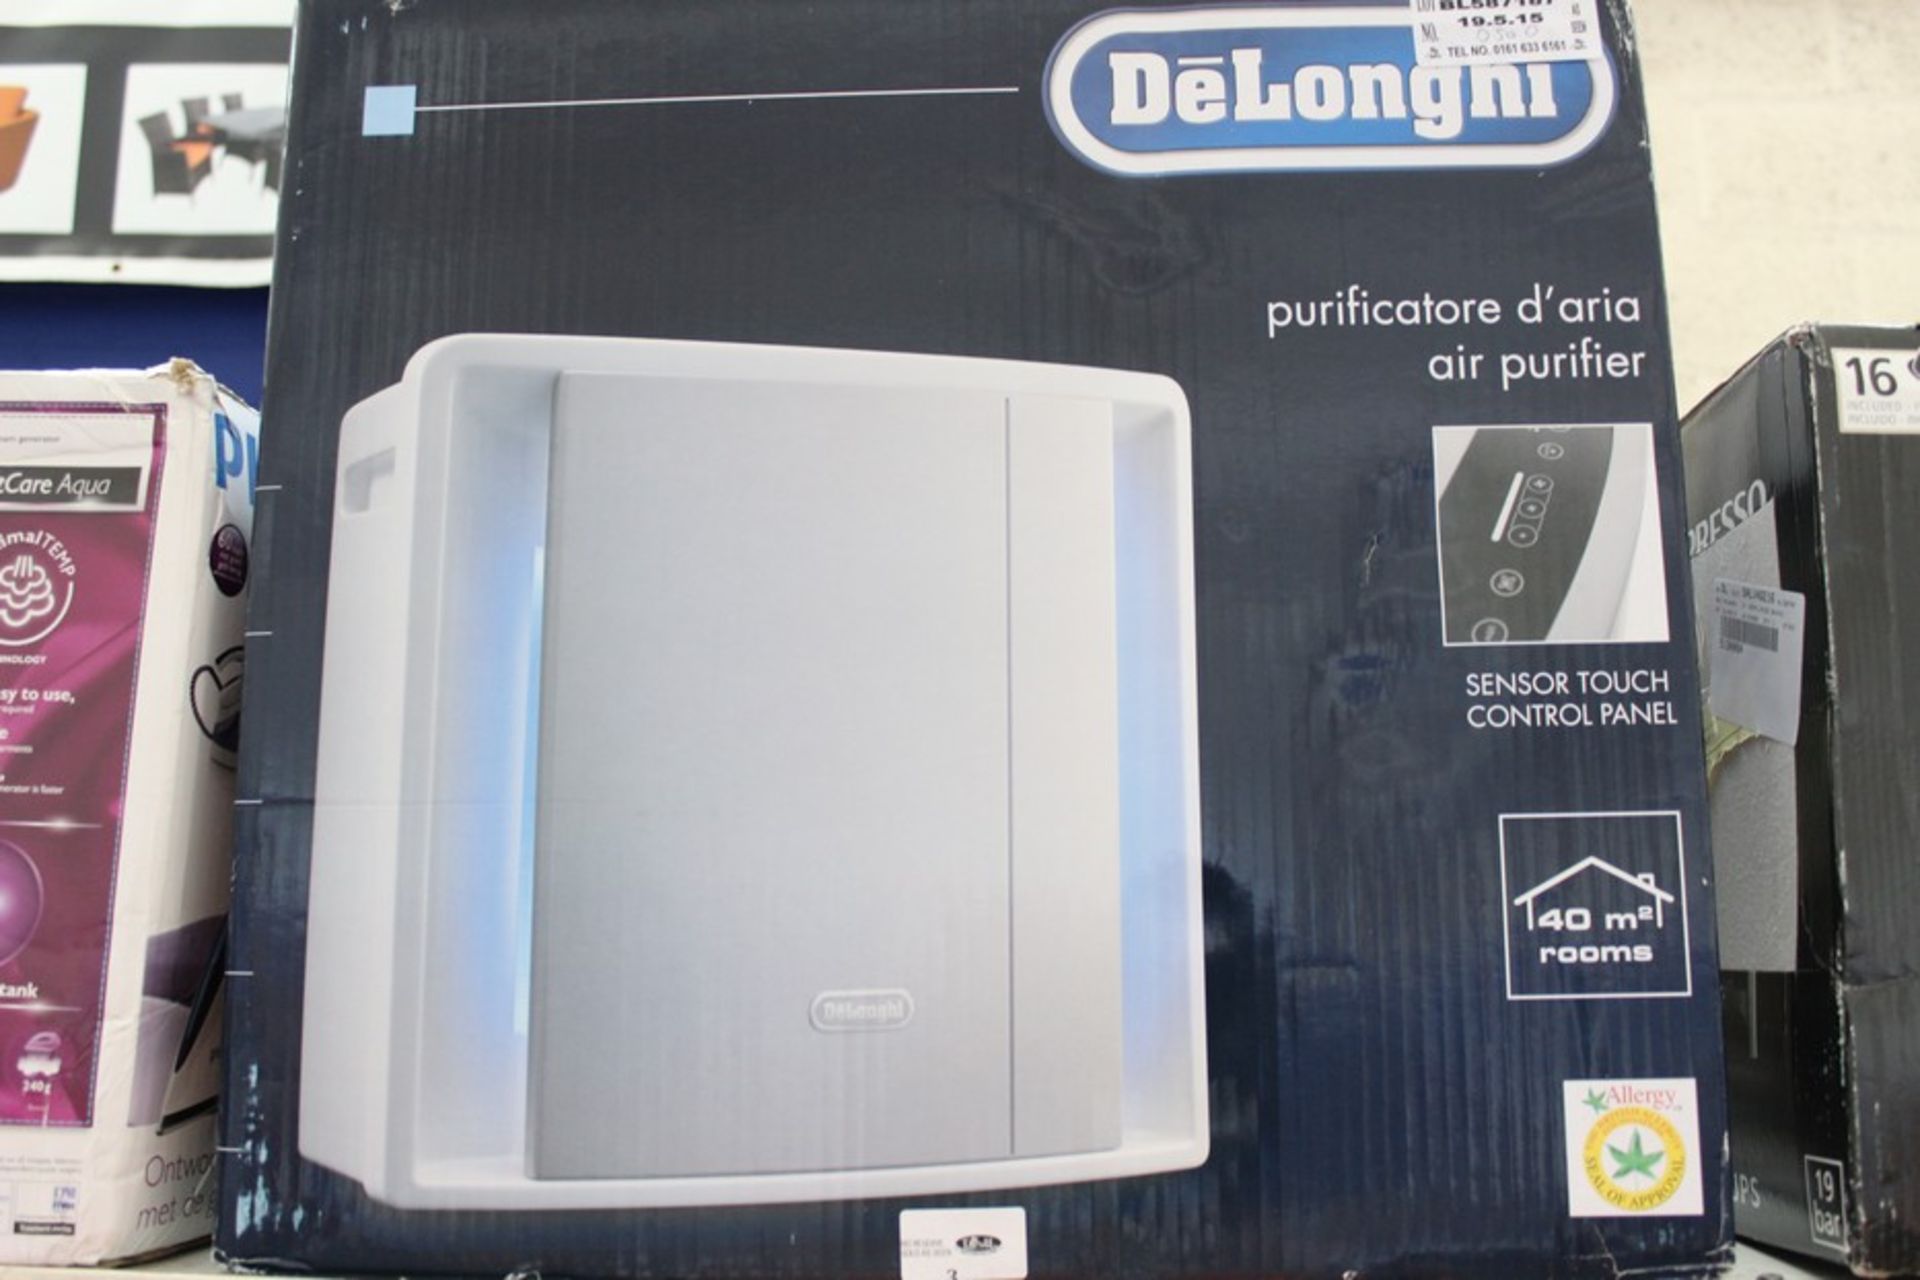 1 x BOXED DELONGHI AIR PURIFIER RRP £50 (587187)(19.5.15)  *PLEASE NOTE THAT THE BID PRICE IS